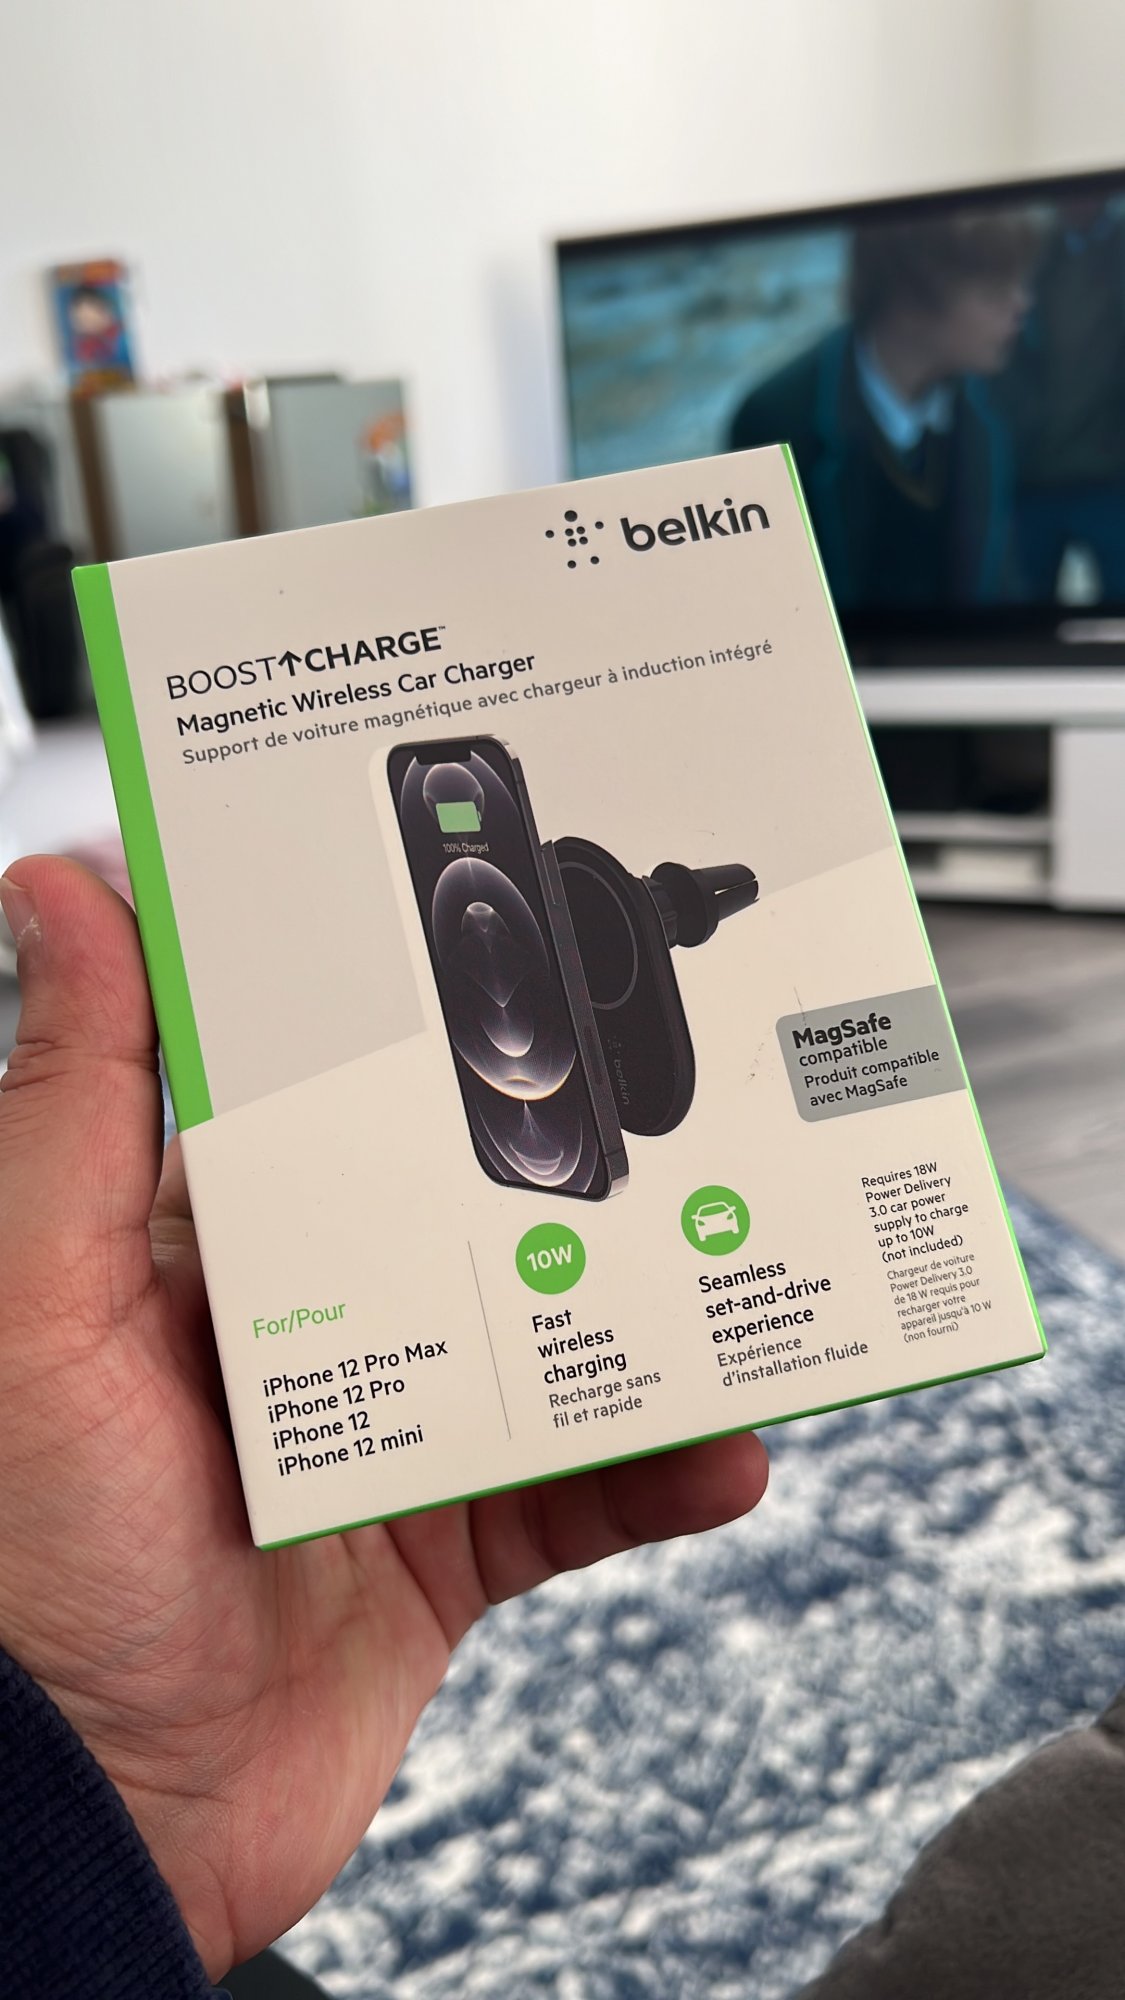 Belkin Boost Charge - MagSafe Wireless Car Charger